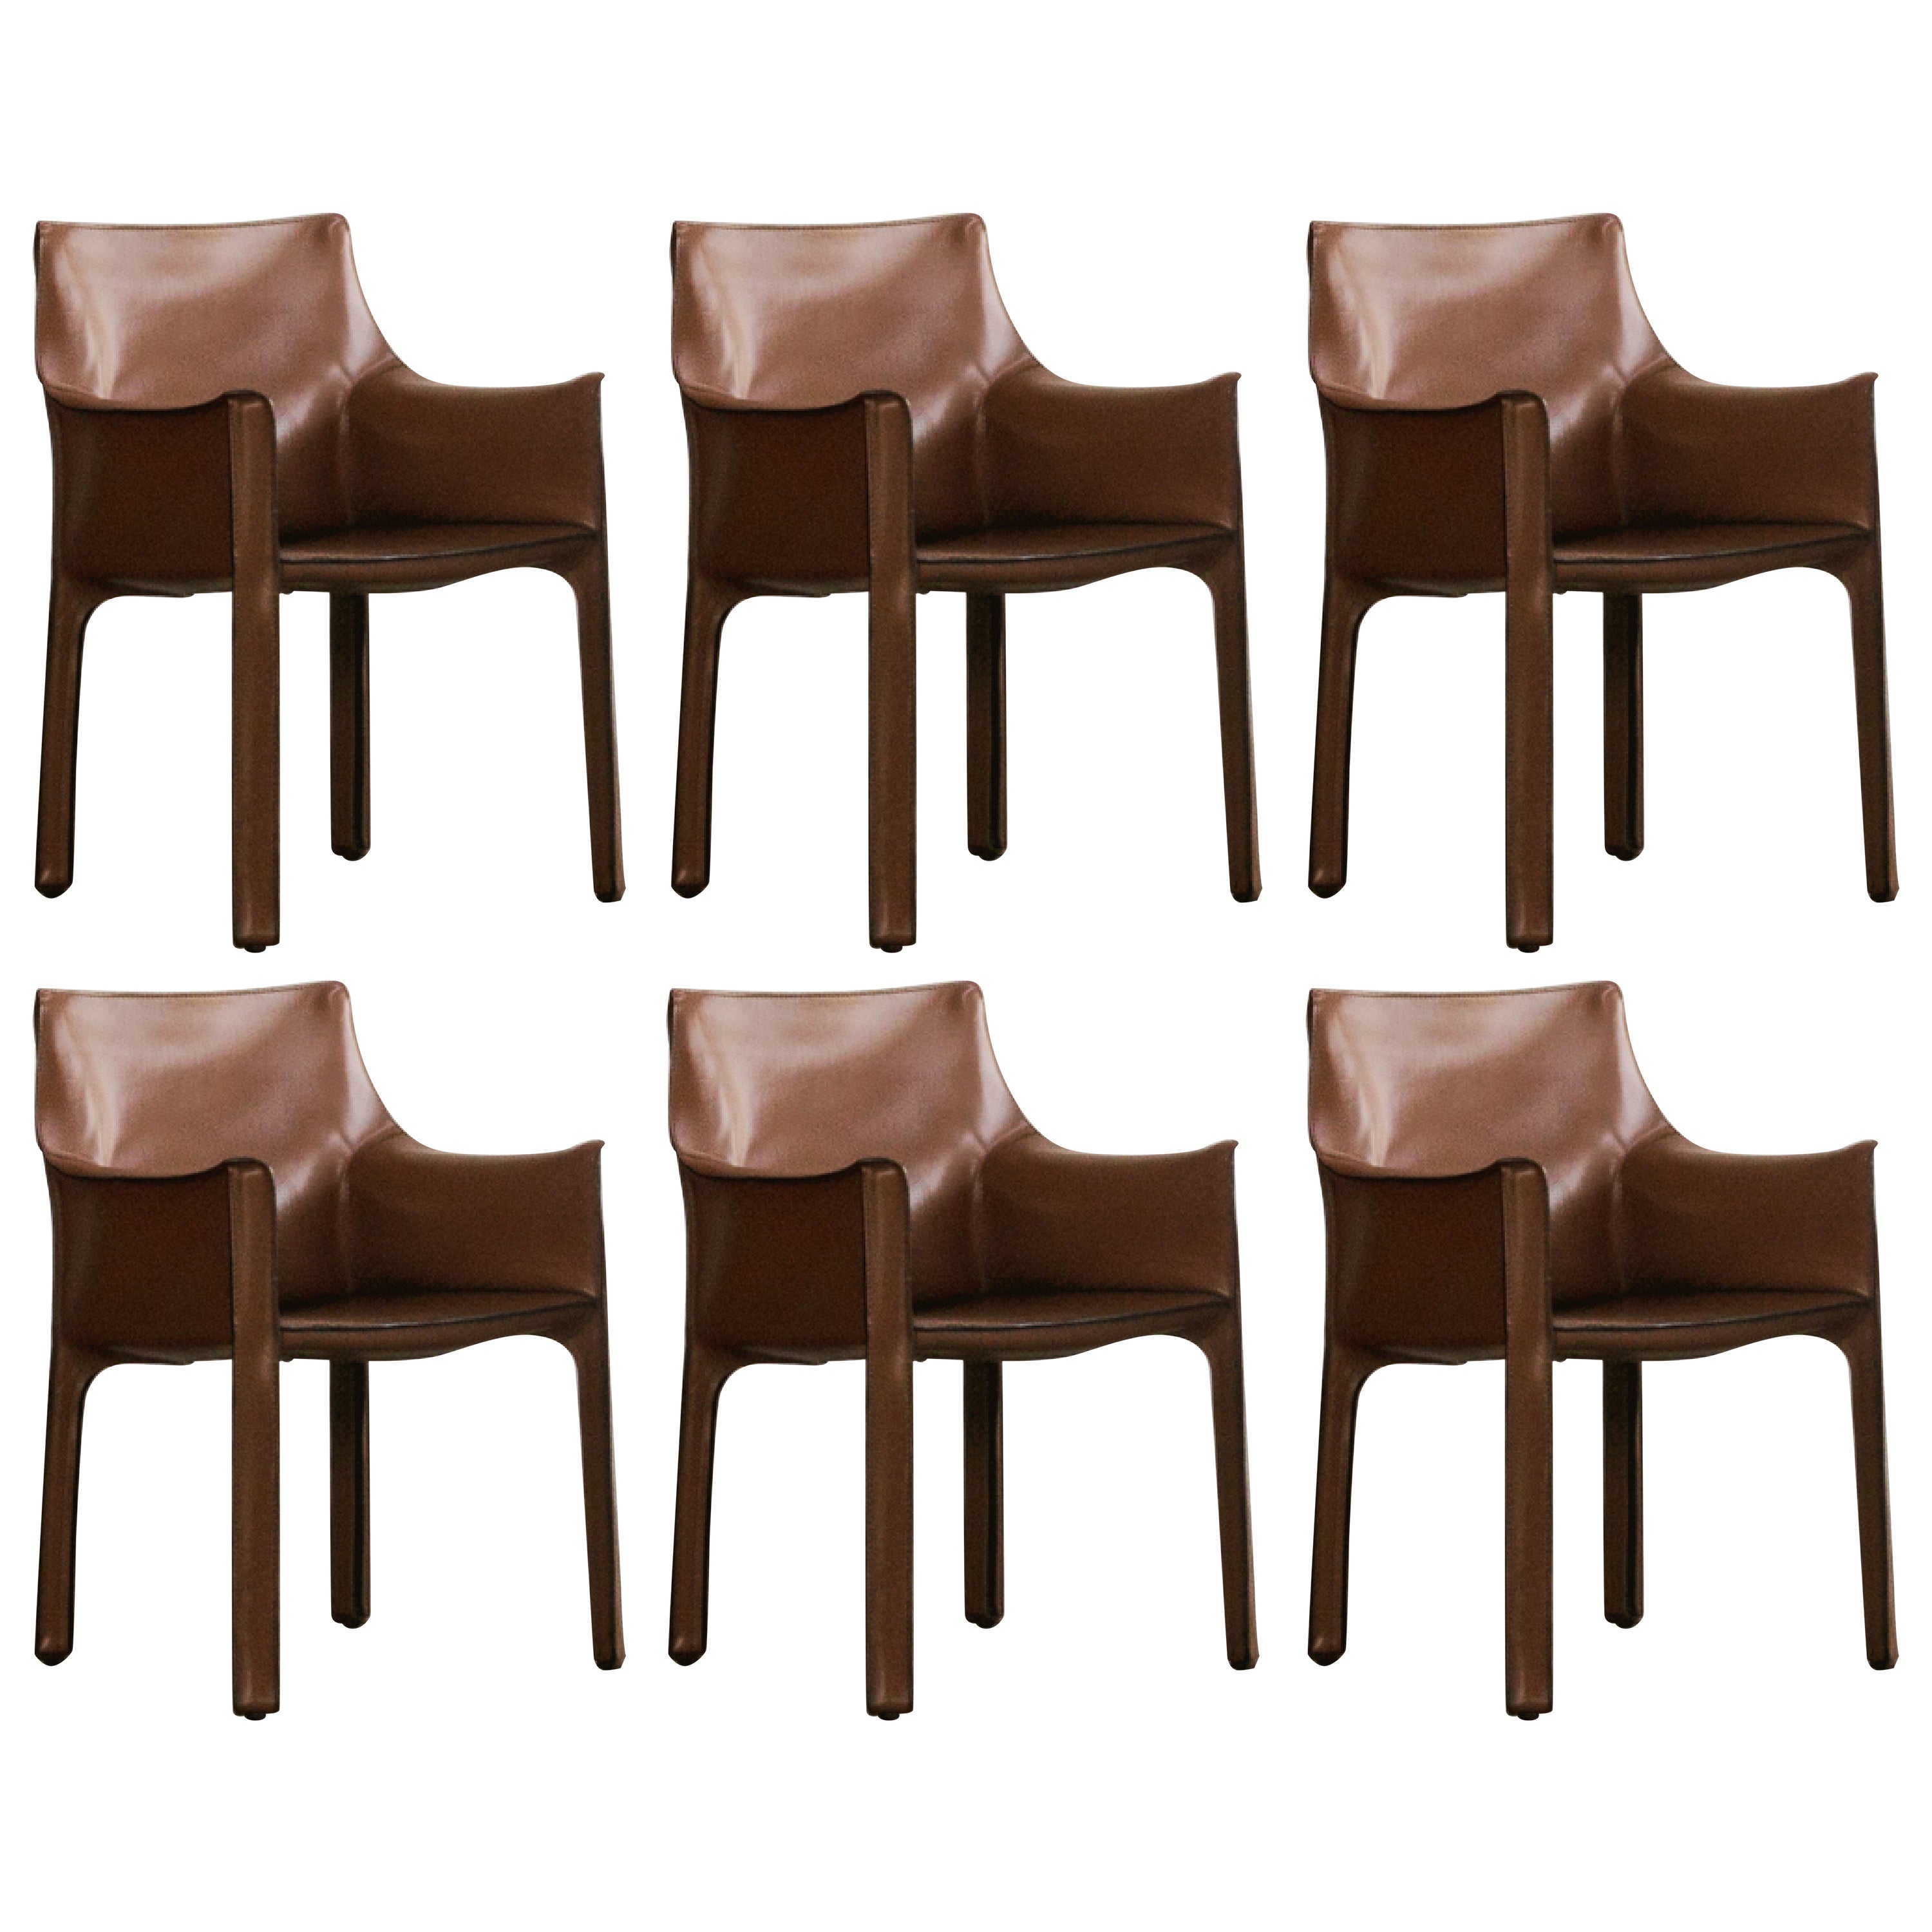 Mario Bellini "CAB" 413 Dining Chairs for Cassina, 1977, Set of 6